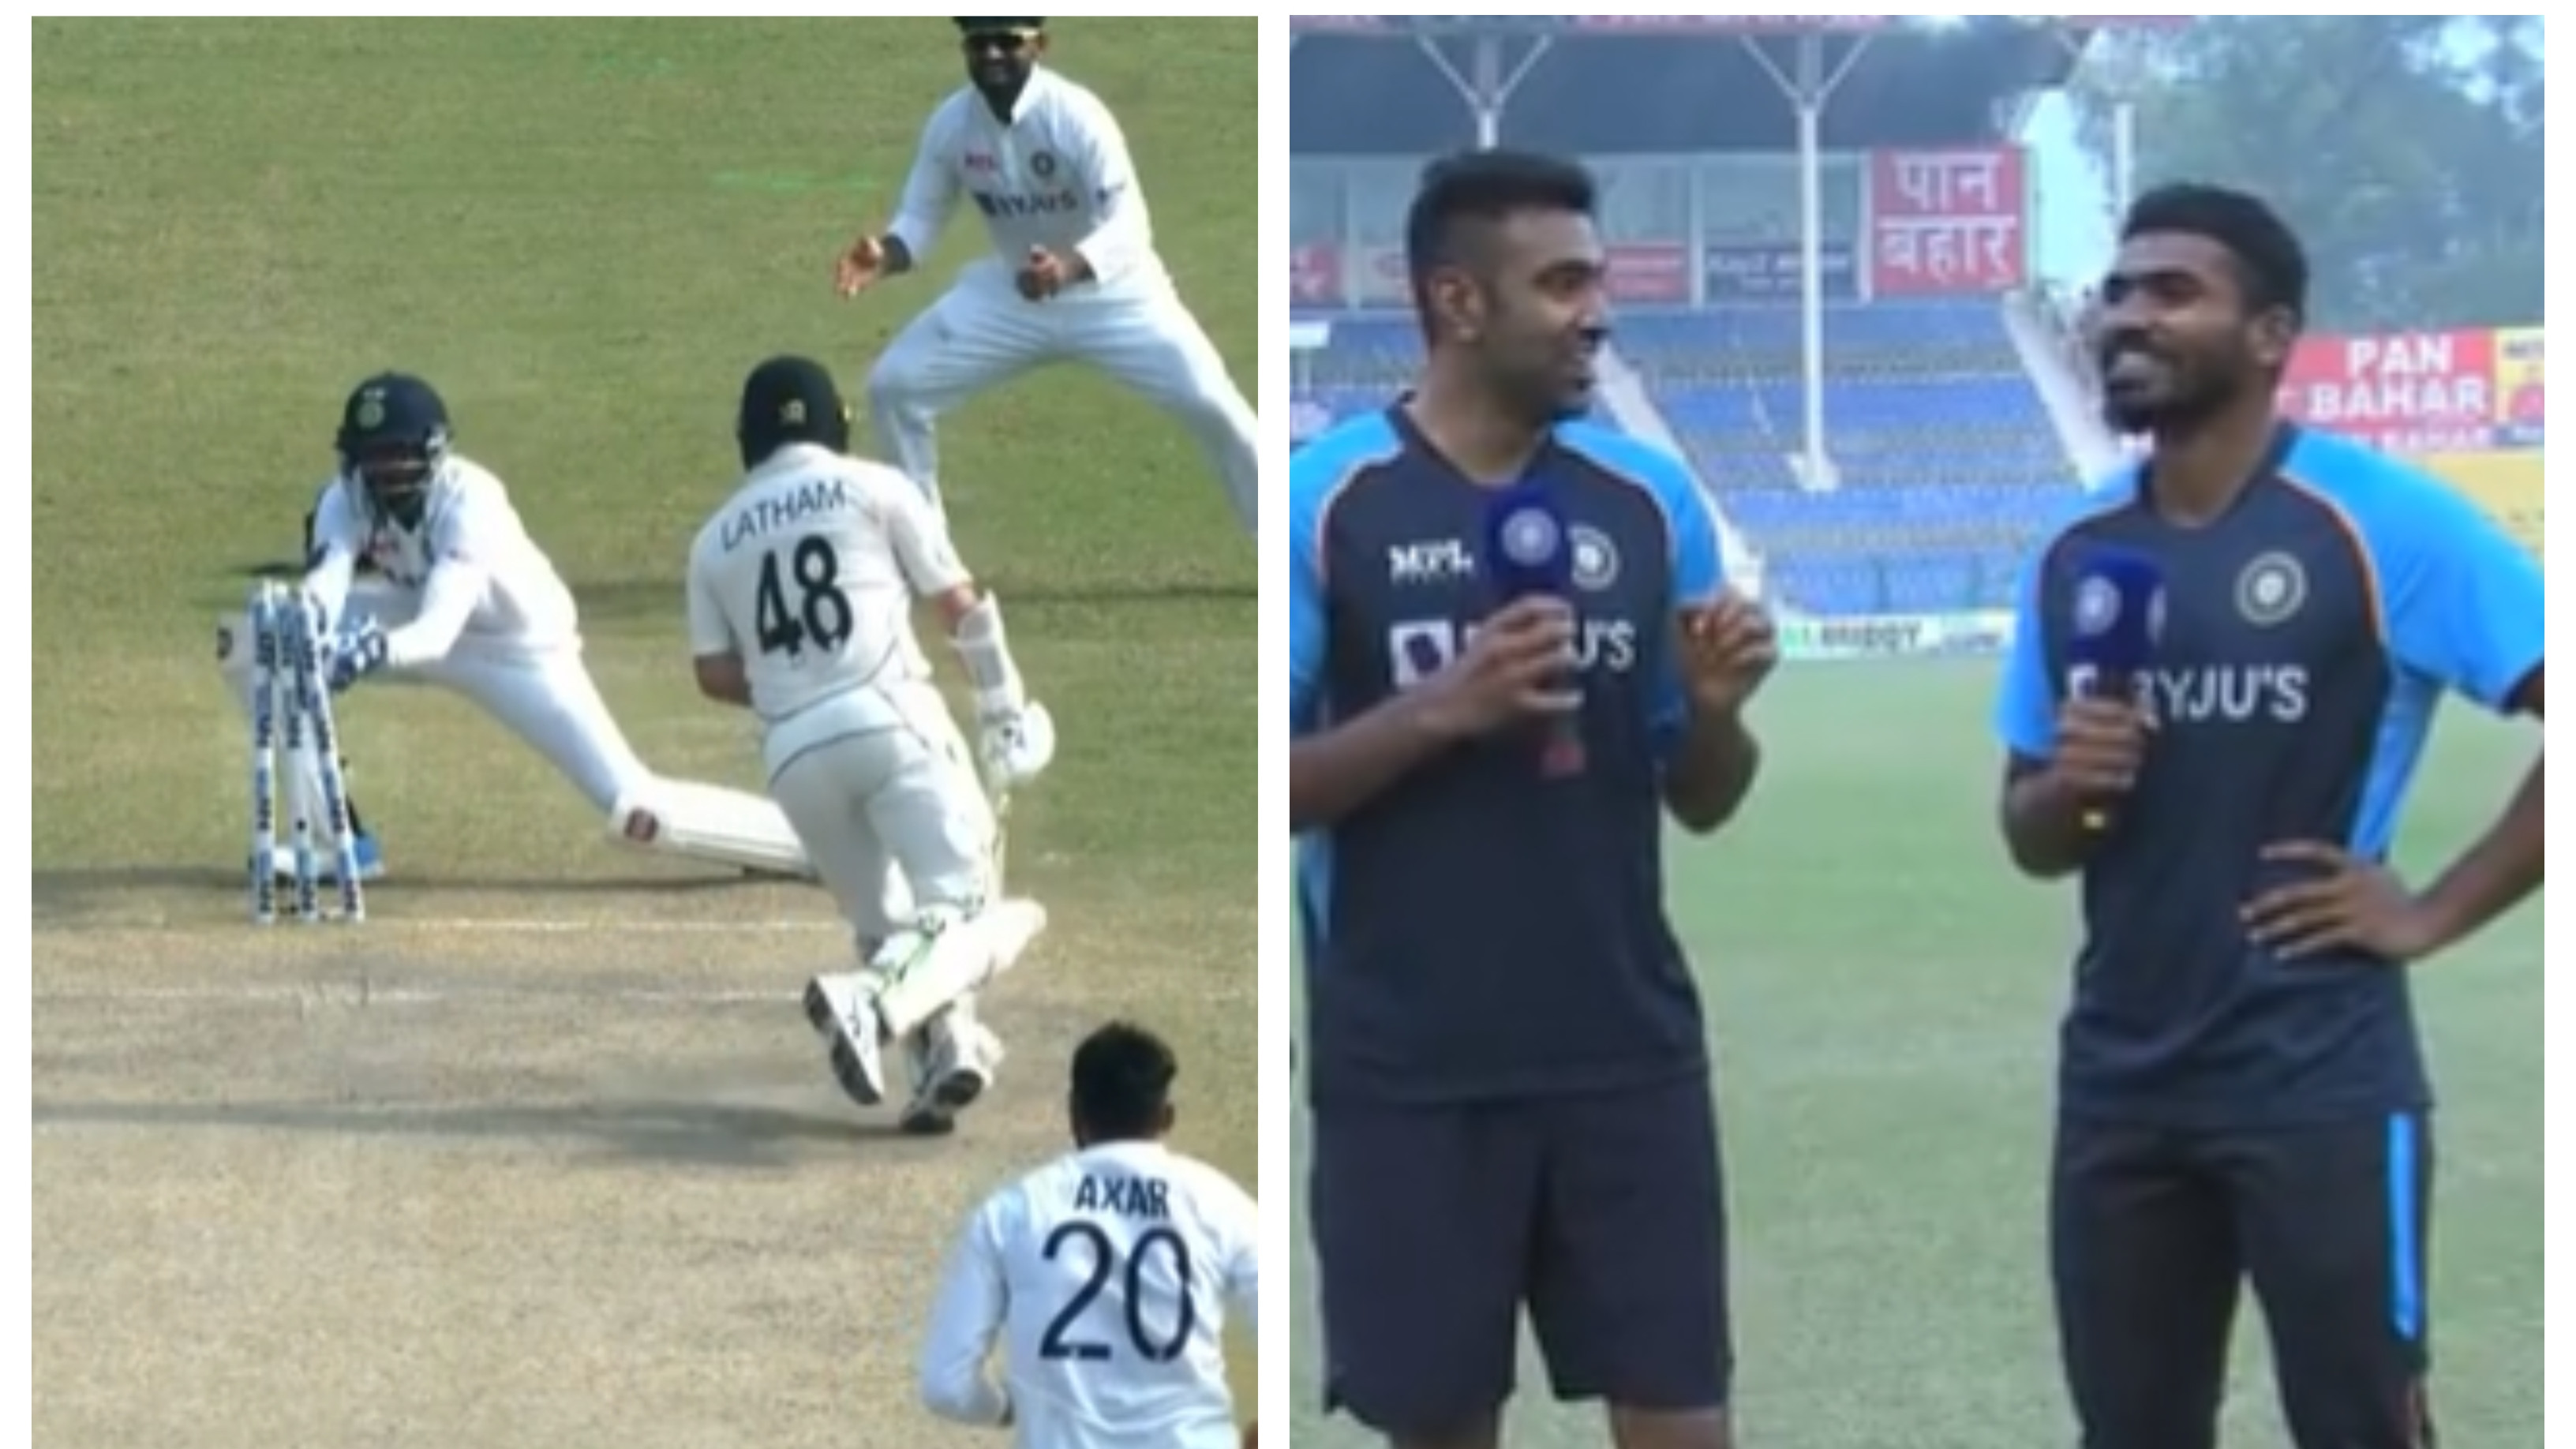 IND v NZ 2021: WATCH – “I only had 12 minutes to get set for the game”, says substitute wicketkeeper KS Bharat